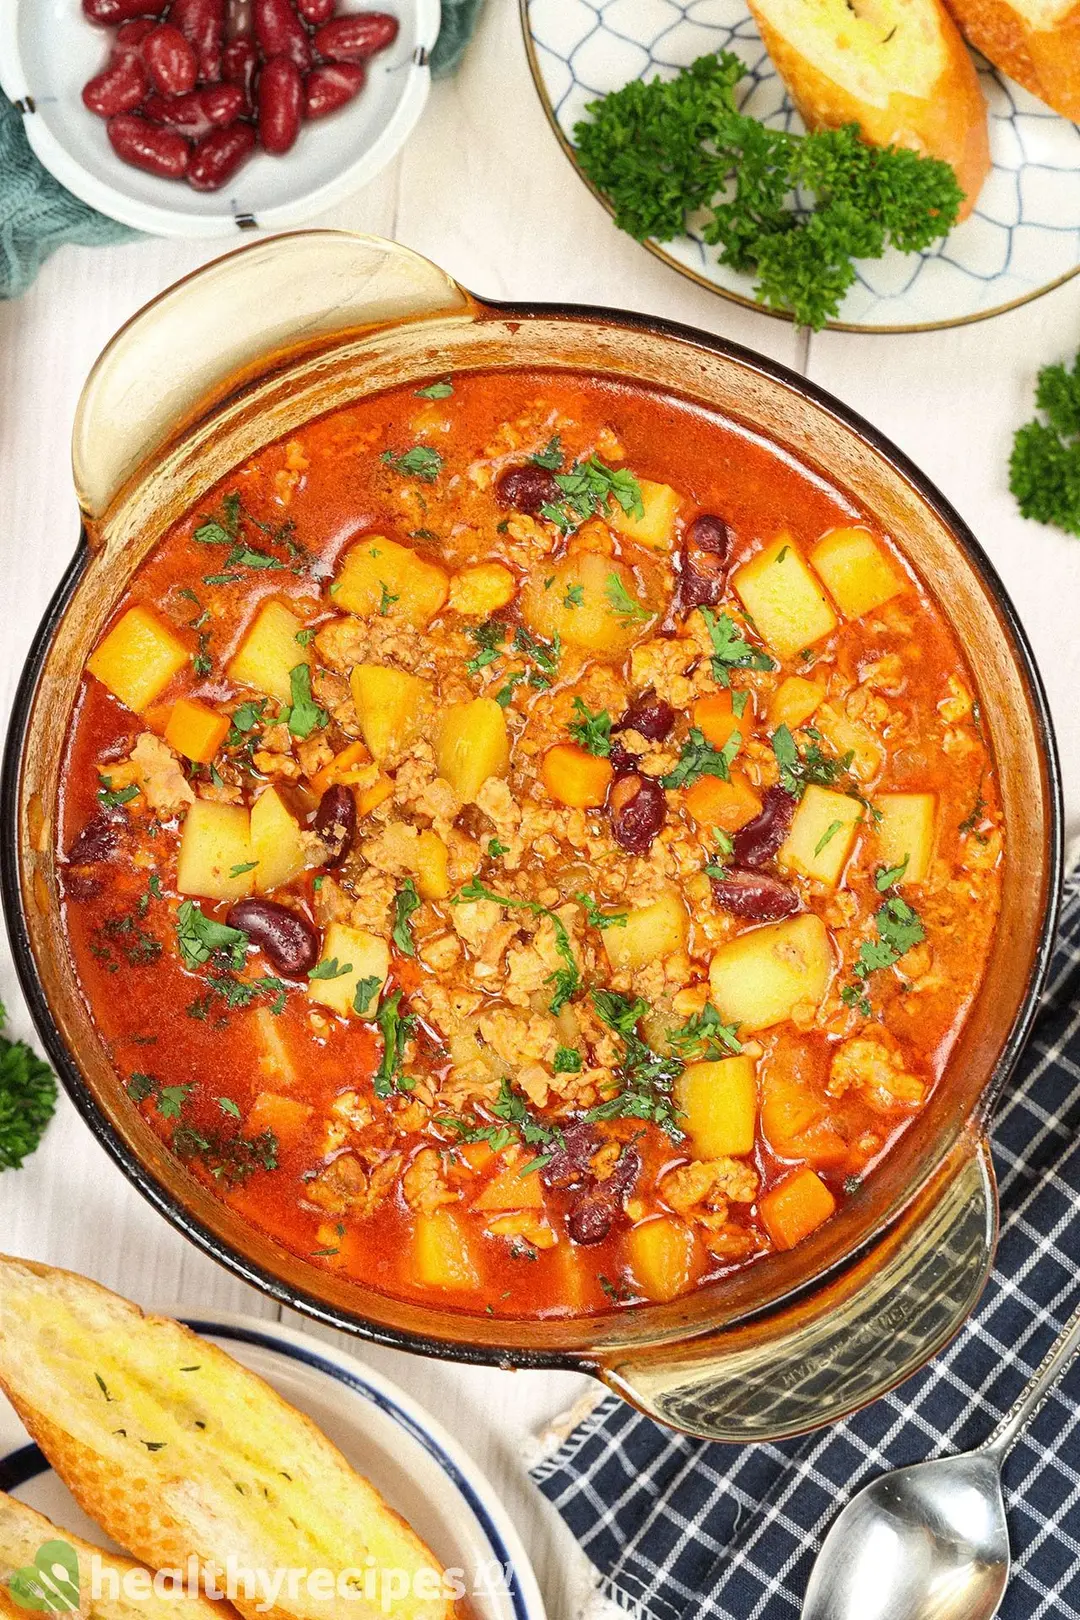 A large pot of ground chicken soup filled to the brim with cubed carrots, cubed potatoes, and ground chicken, garnished with chopped parsley